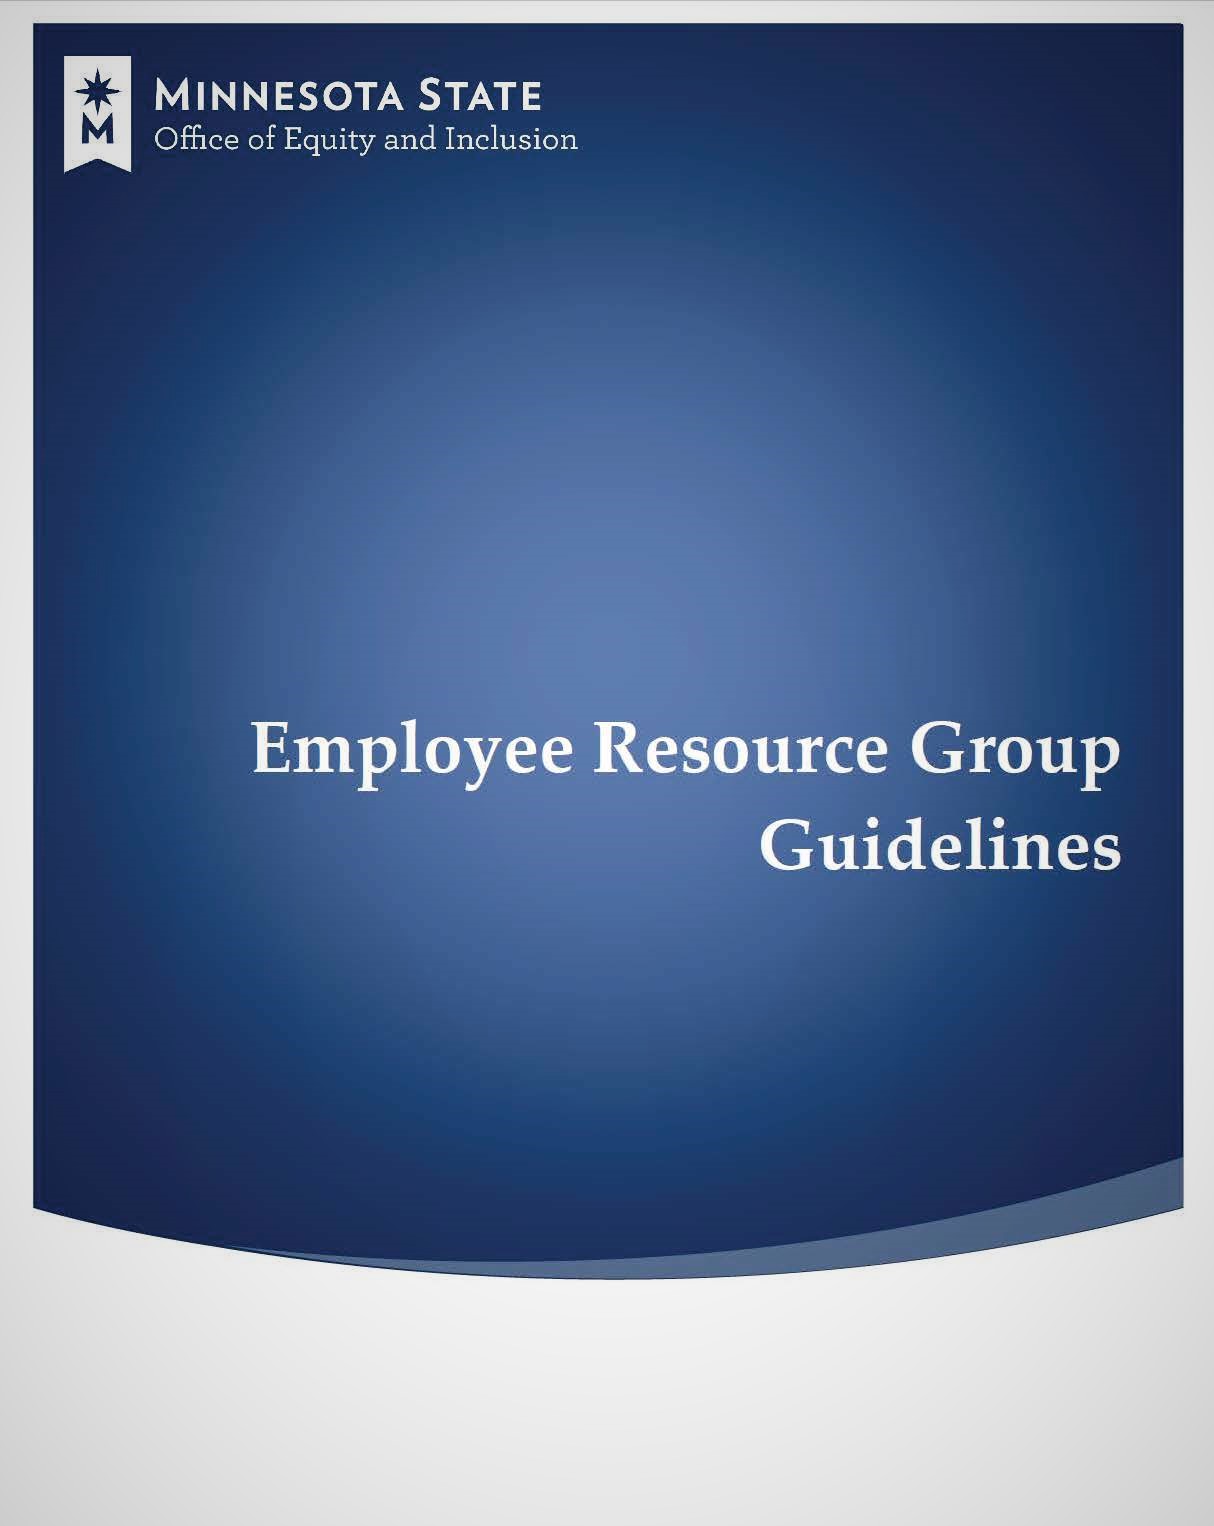 Employee Resource Group Guidelines document blue cover